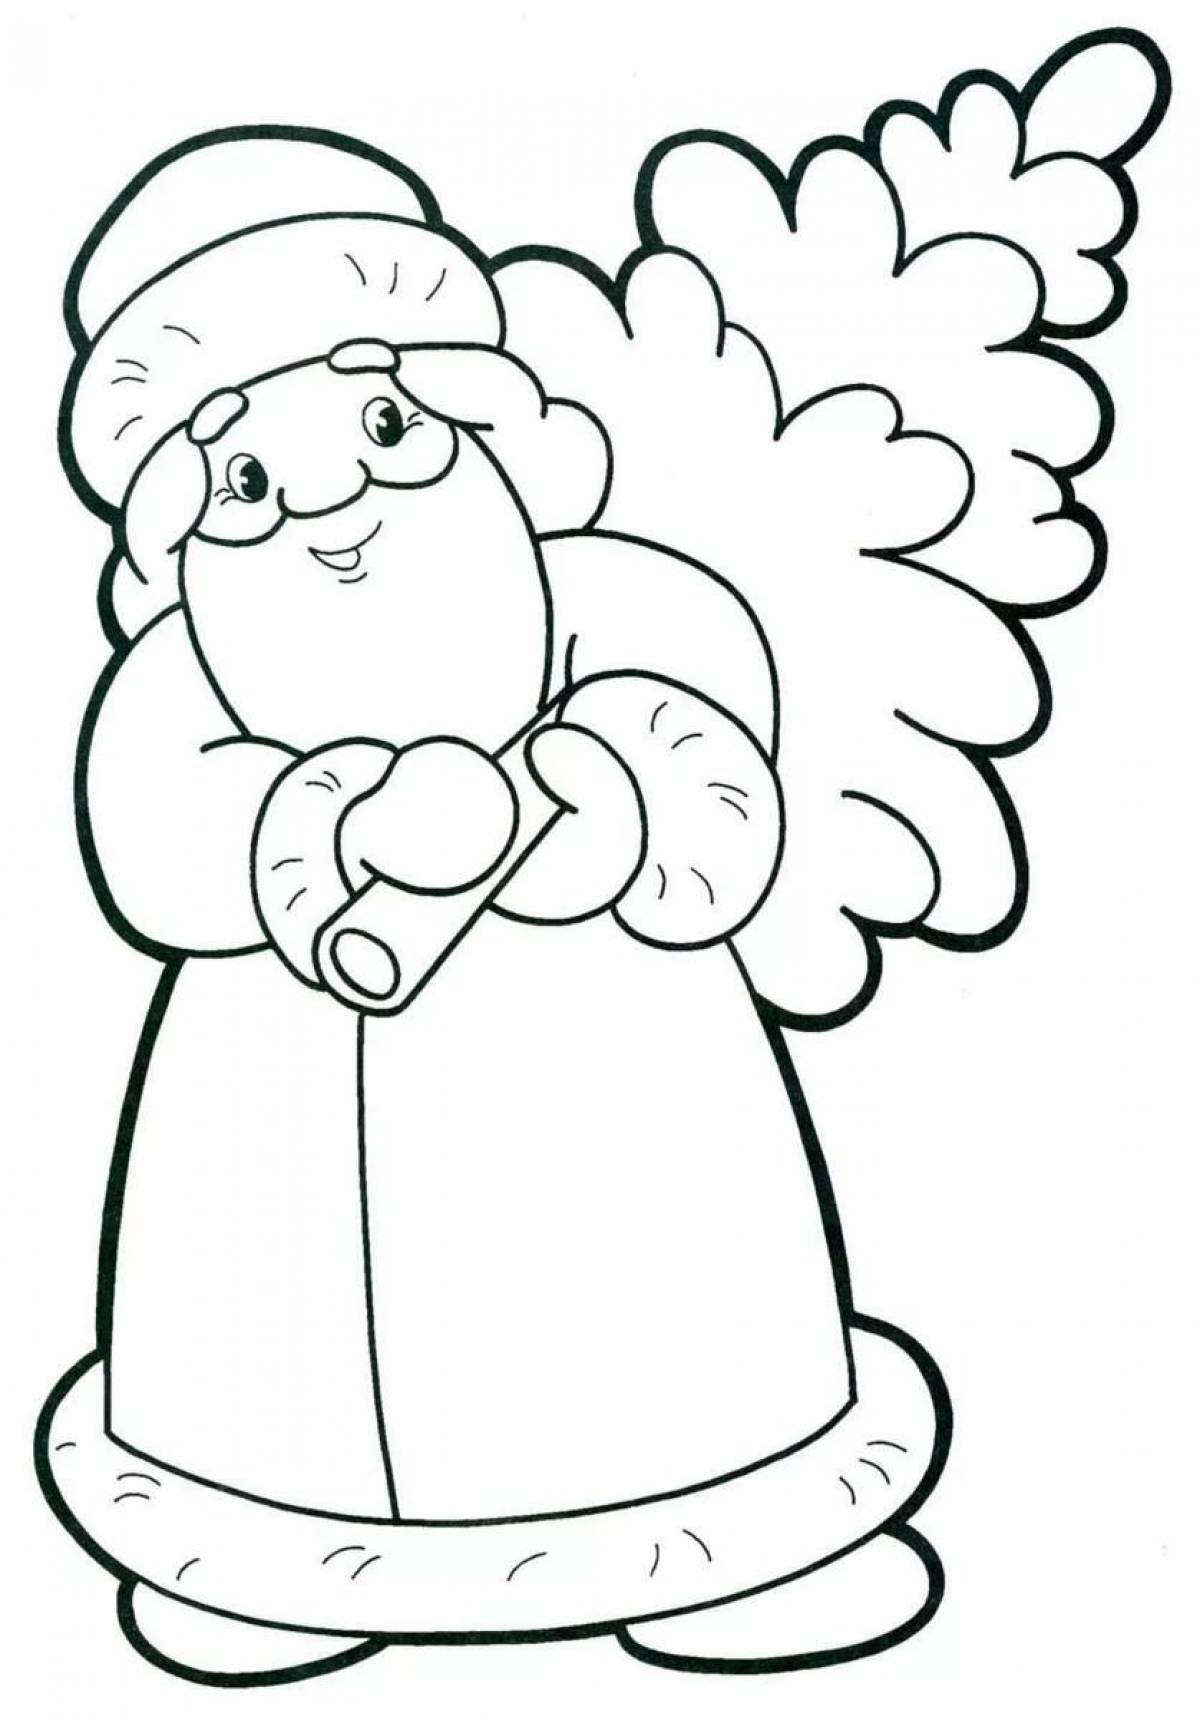 Coloring page whimsical snow maiden